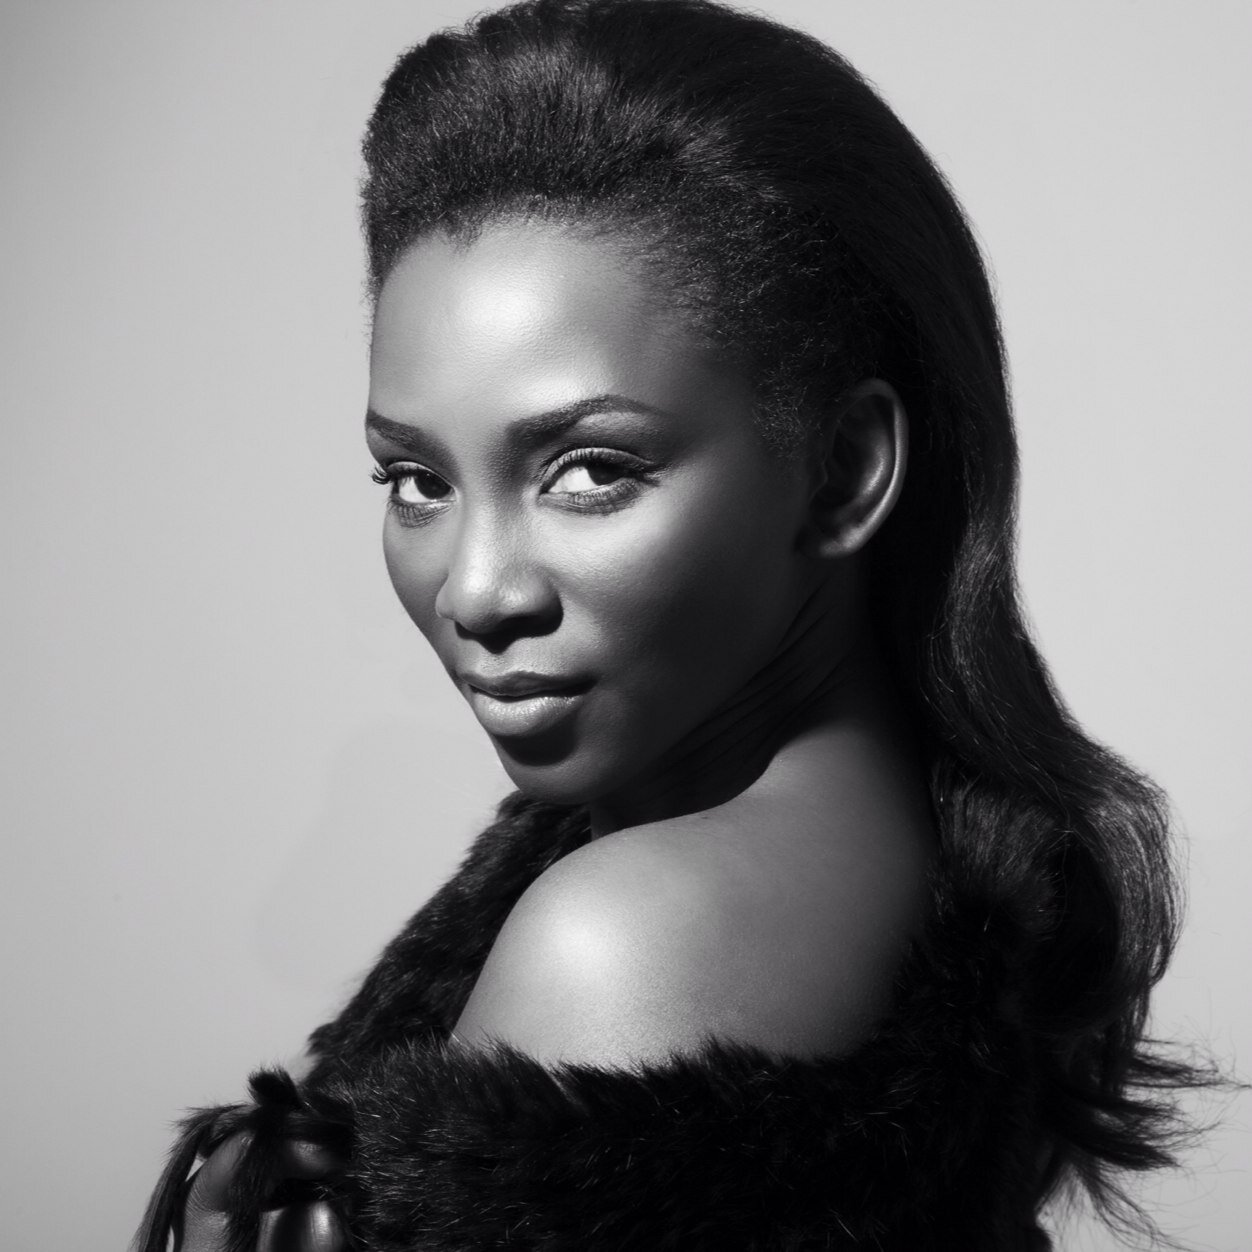 Top 10 Nigerian Women Making History in Entertainment